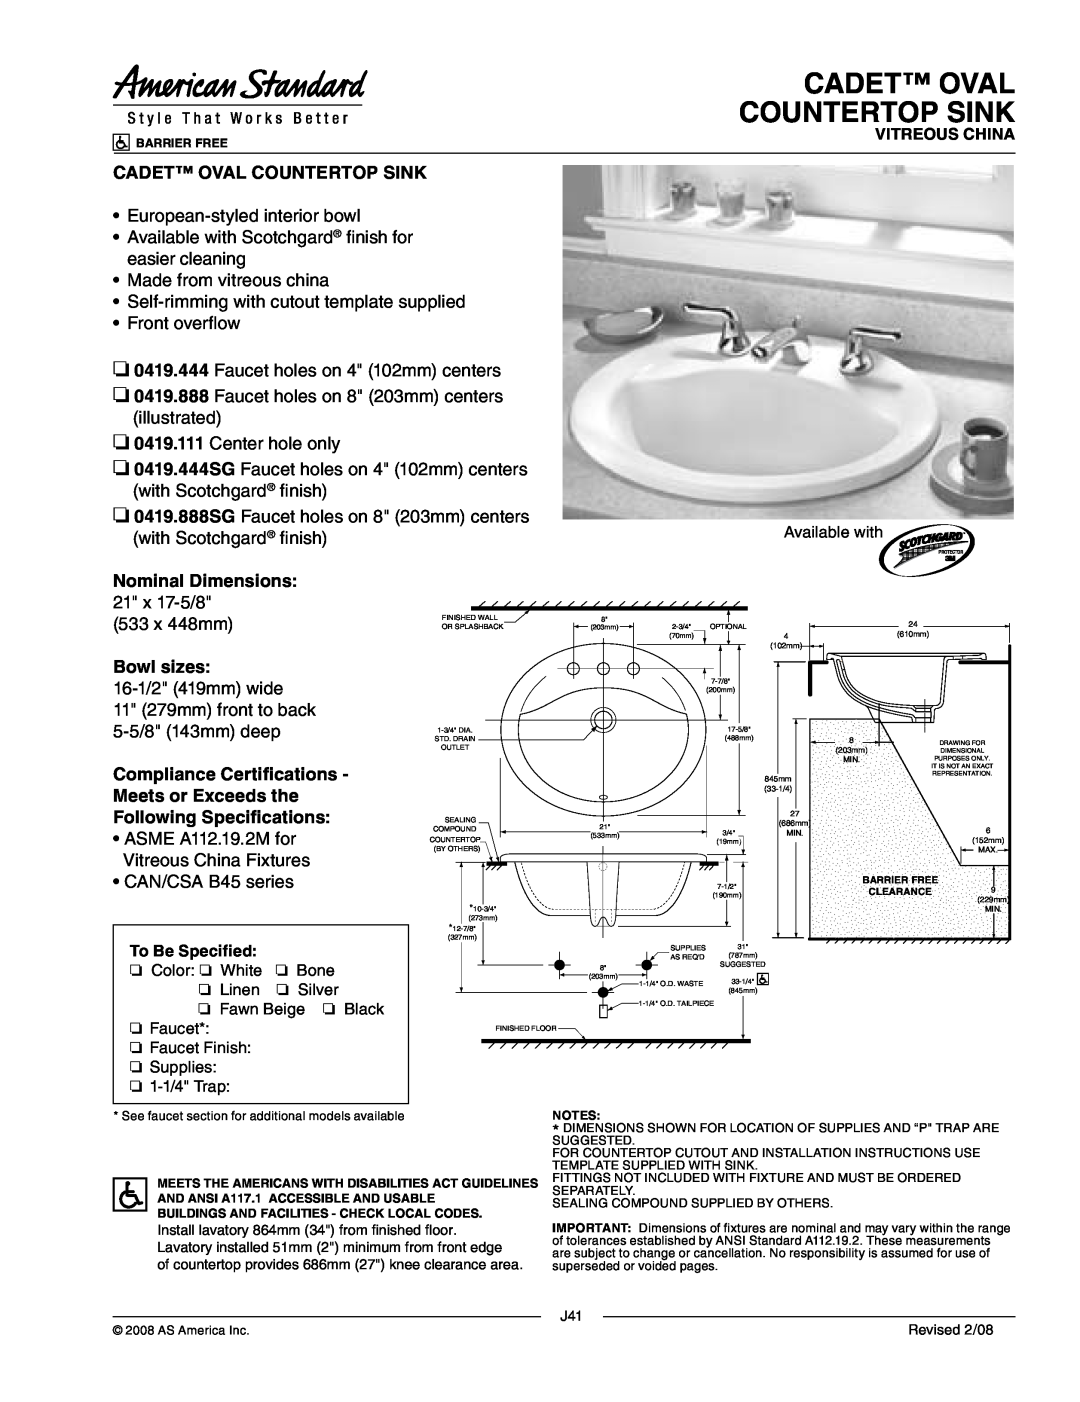 American Standard 0419.111 dimensions Cadet Oval Countertop Sink, 0419.444, 0419.888, Nominal Dimensions 21 x 17-5/8 